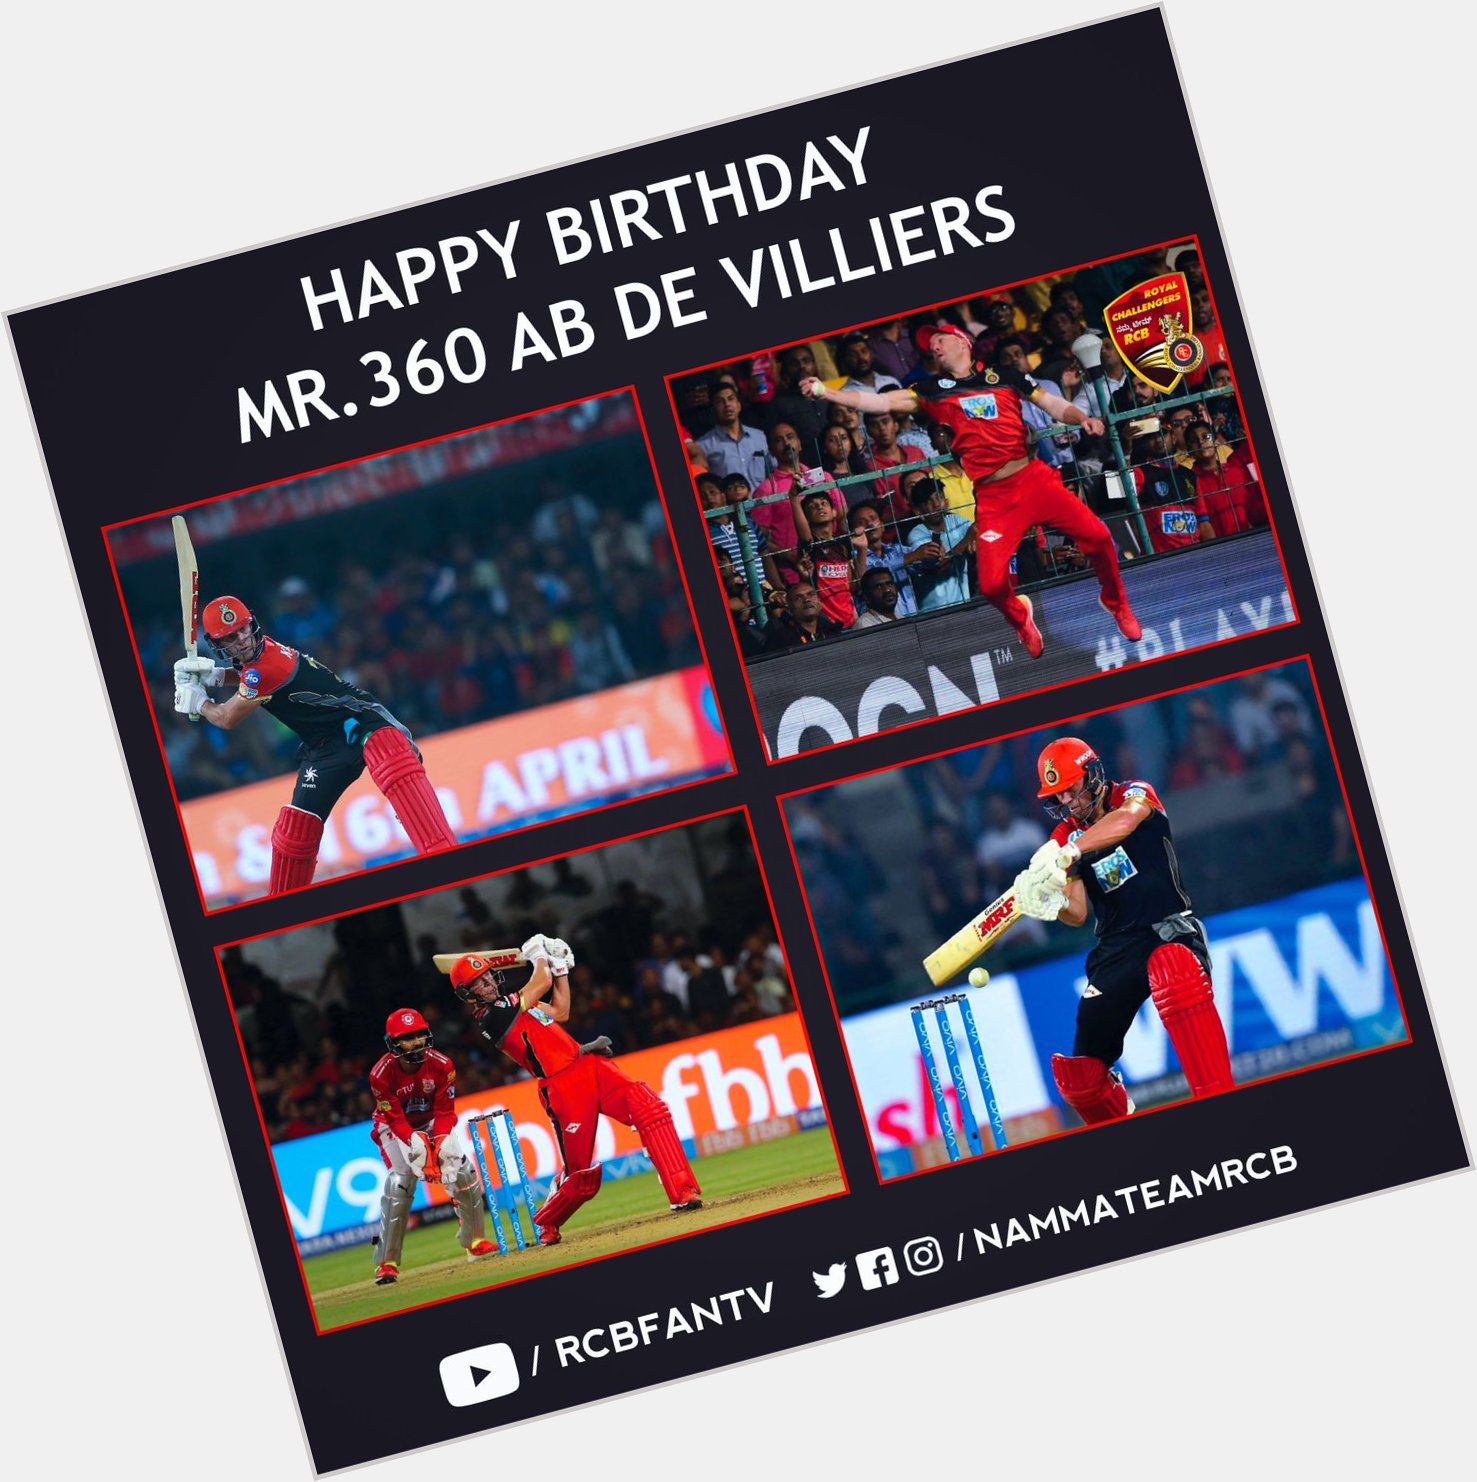 Happy birthday to you AB devilliers 